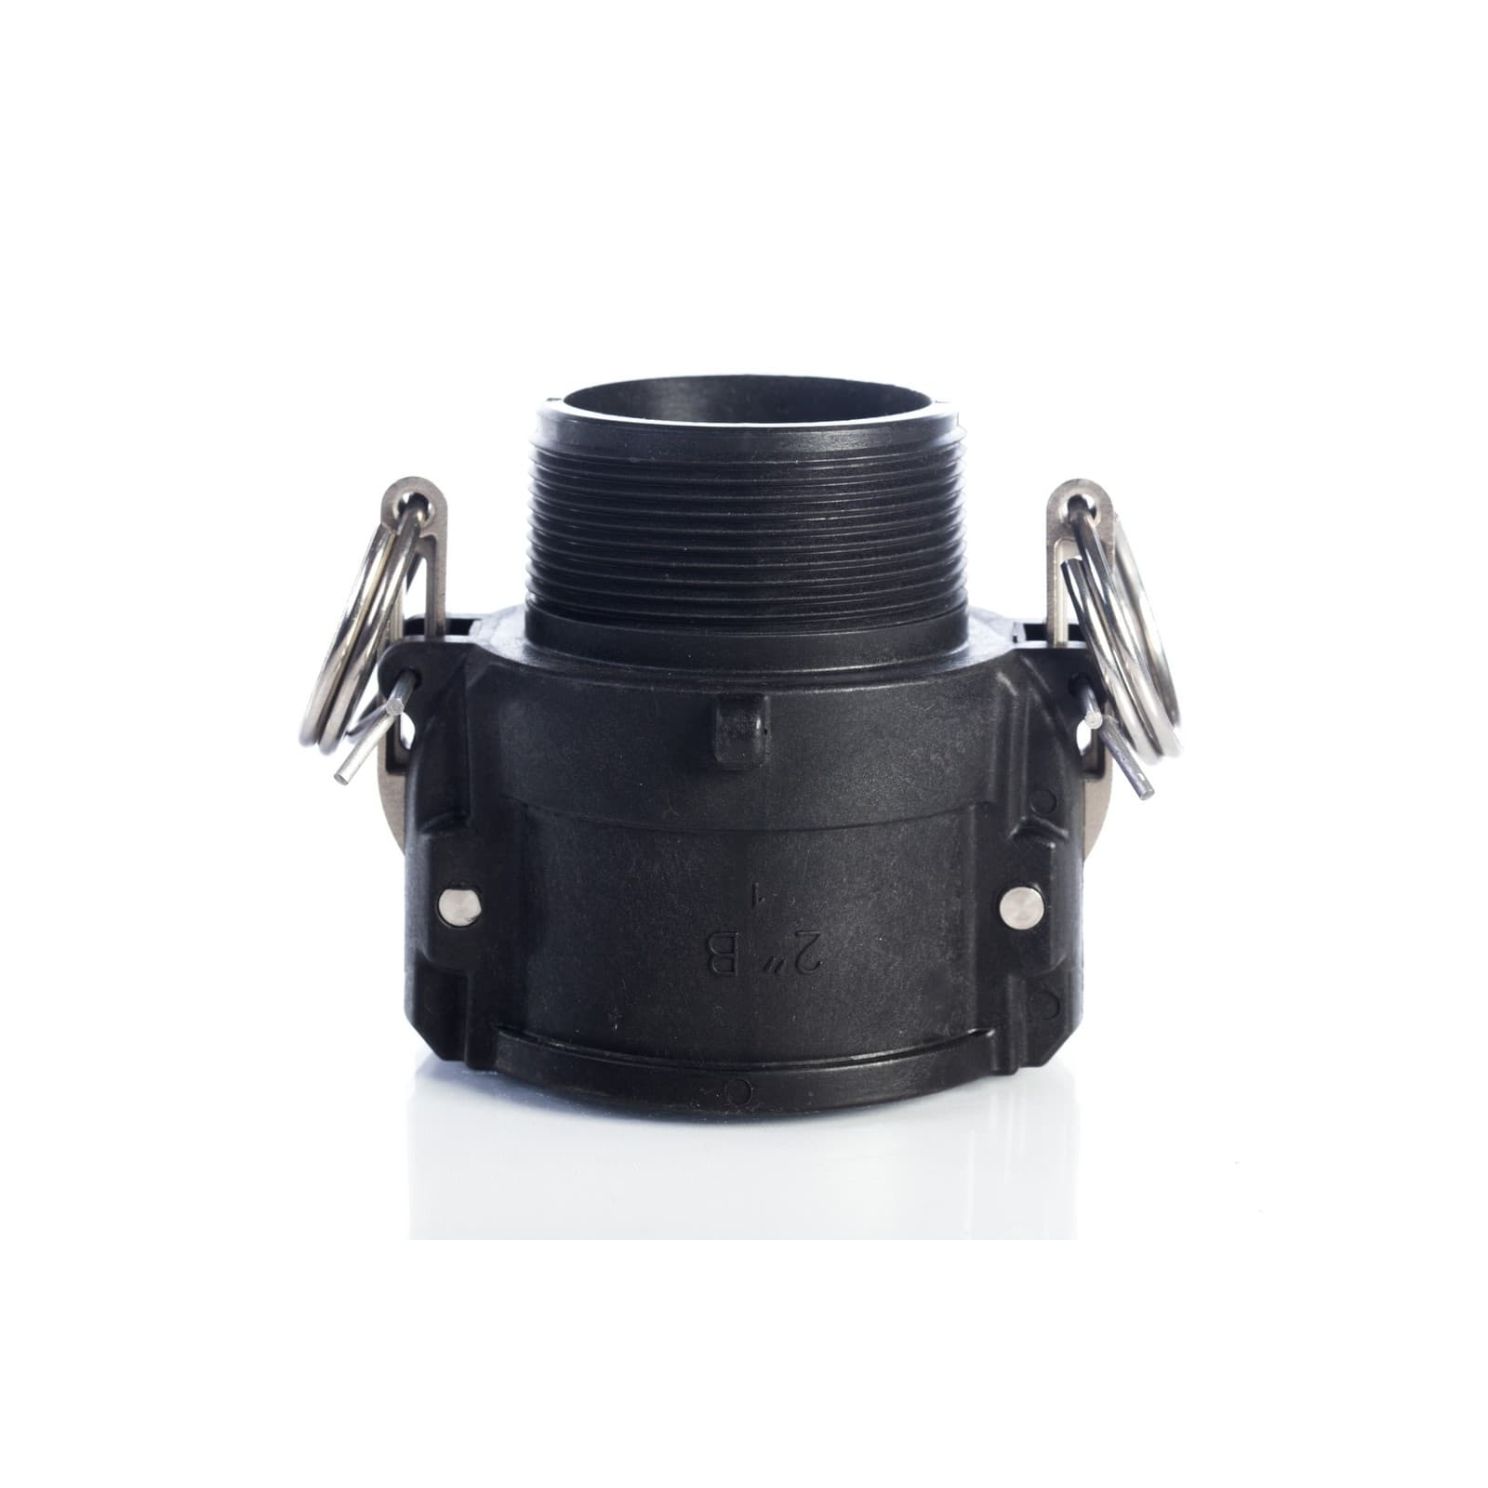 Norwesco 2'' Male Quick Coupler Hose Fitting Adapter